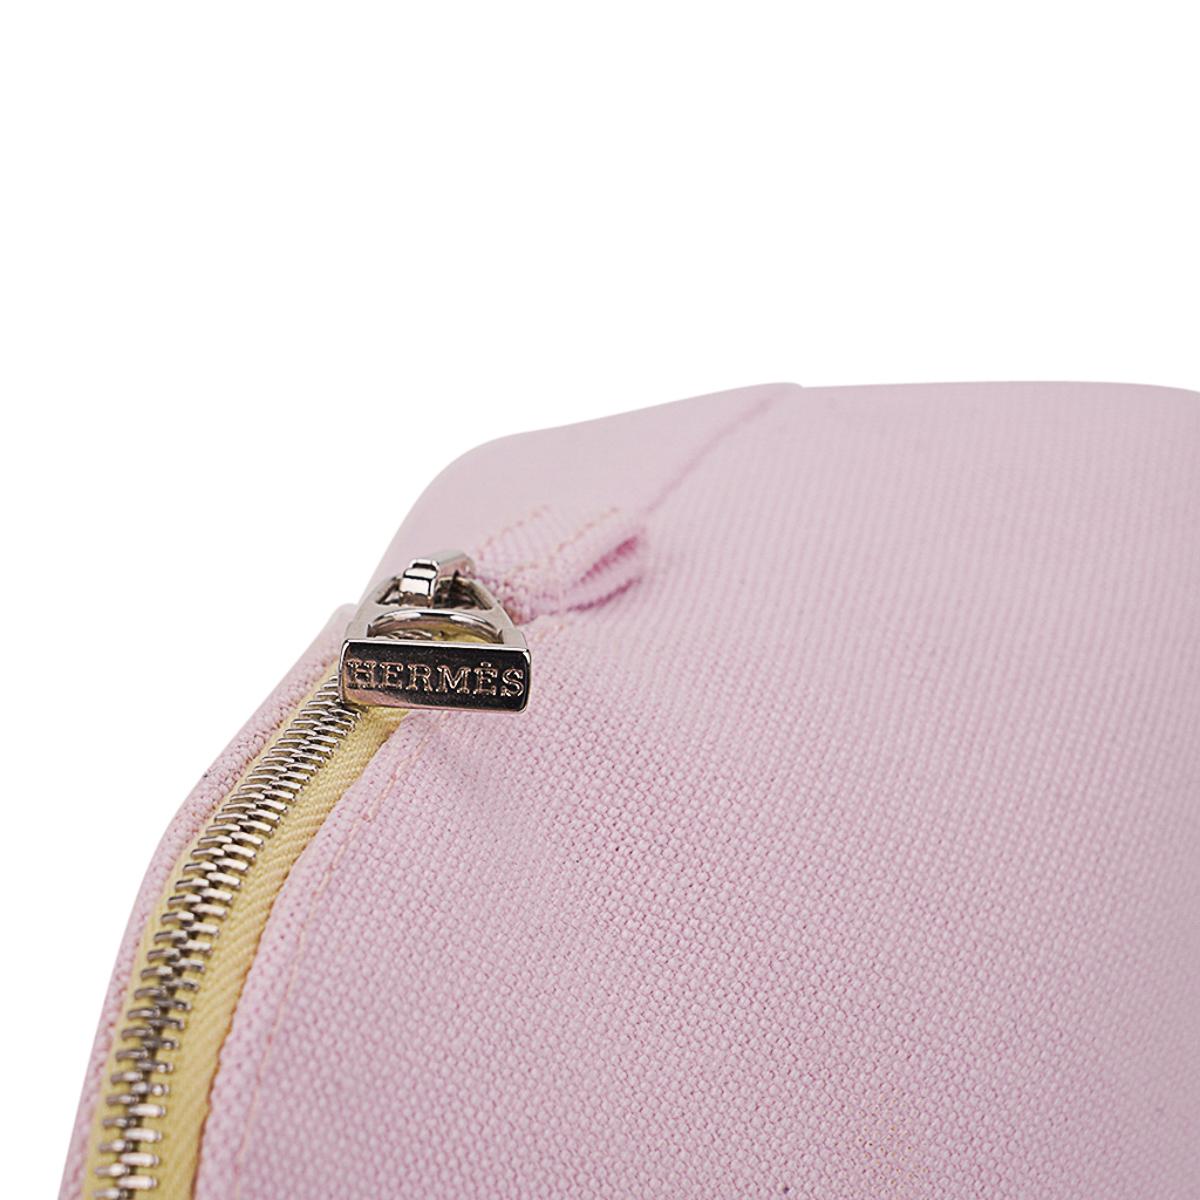 Hermes Circus Bolide Travel Case Pale Pink Embroidered For Sale 5